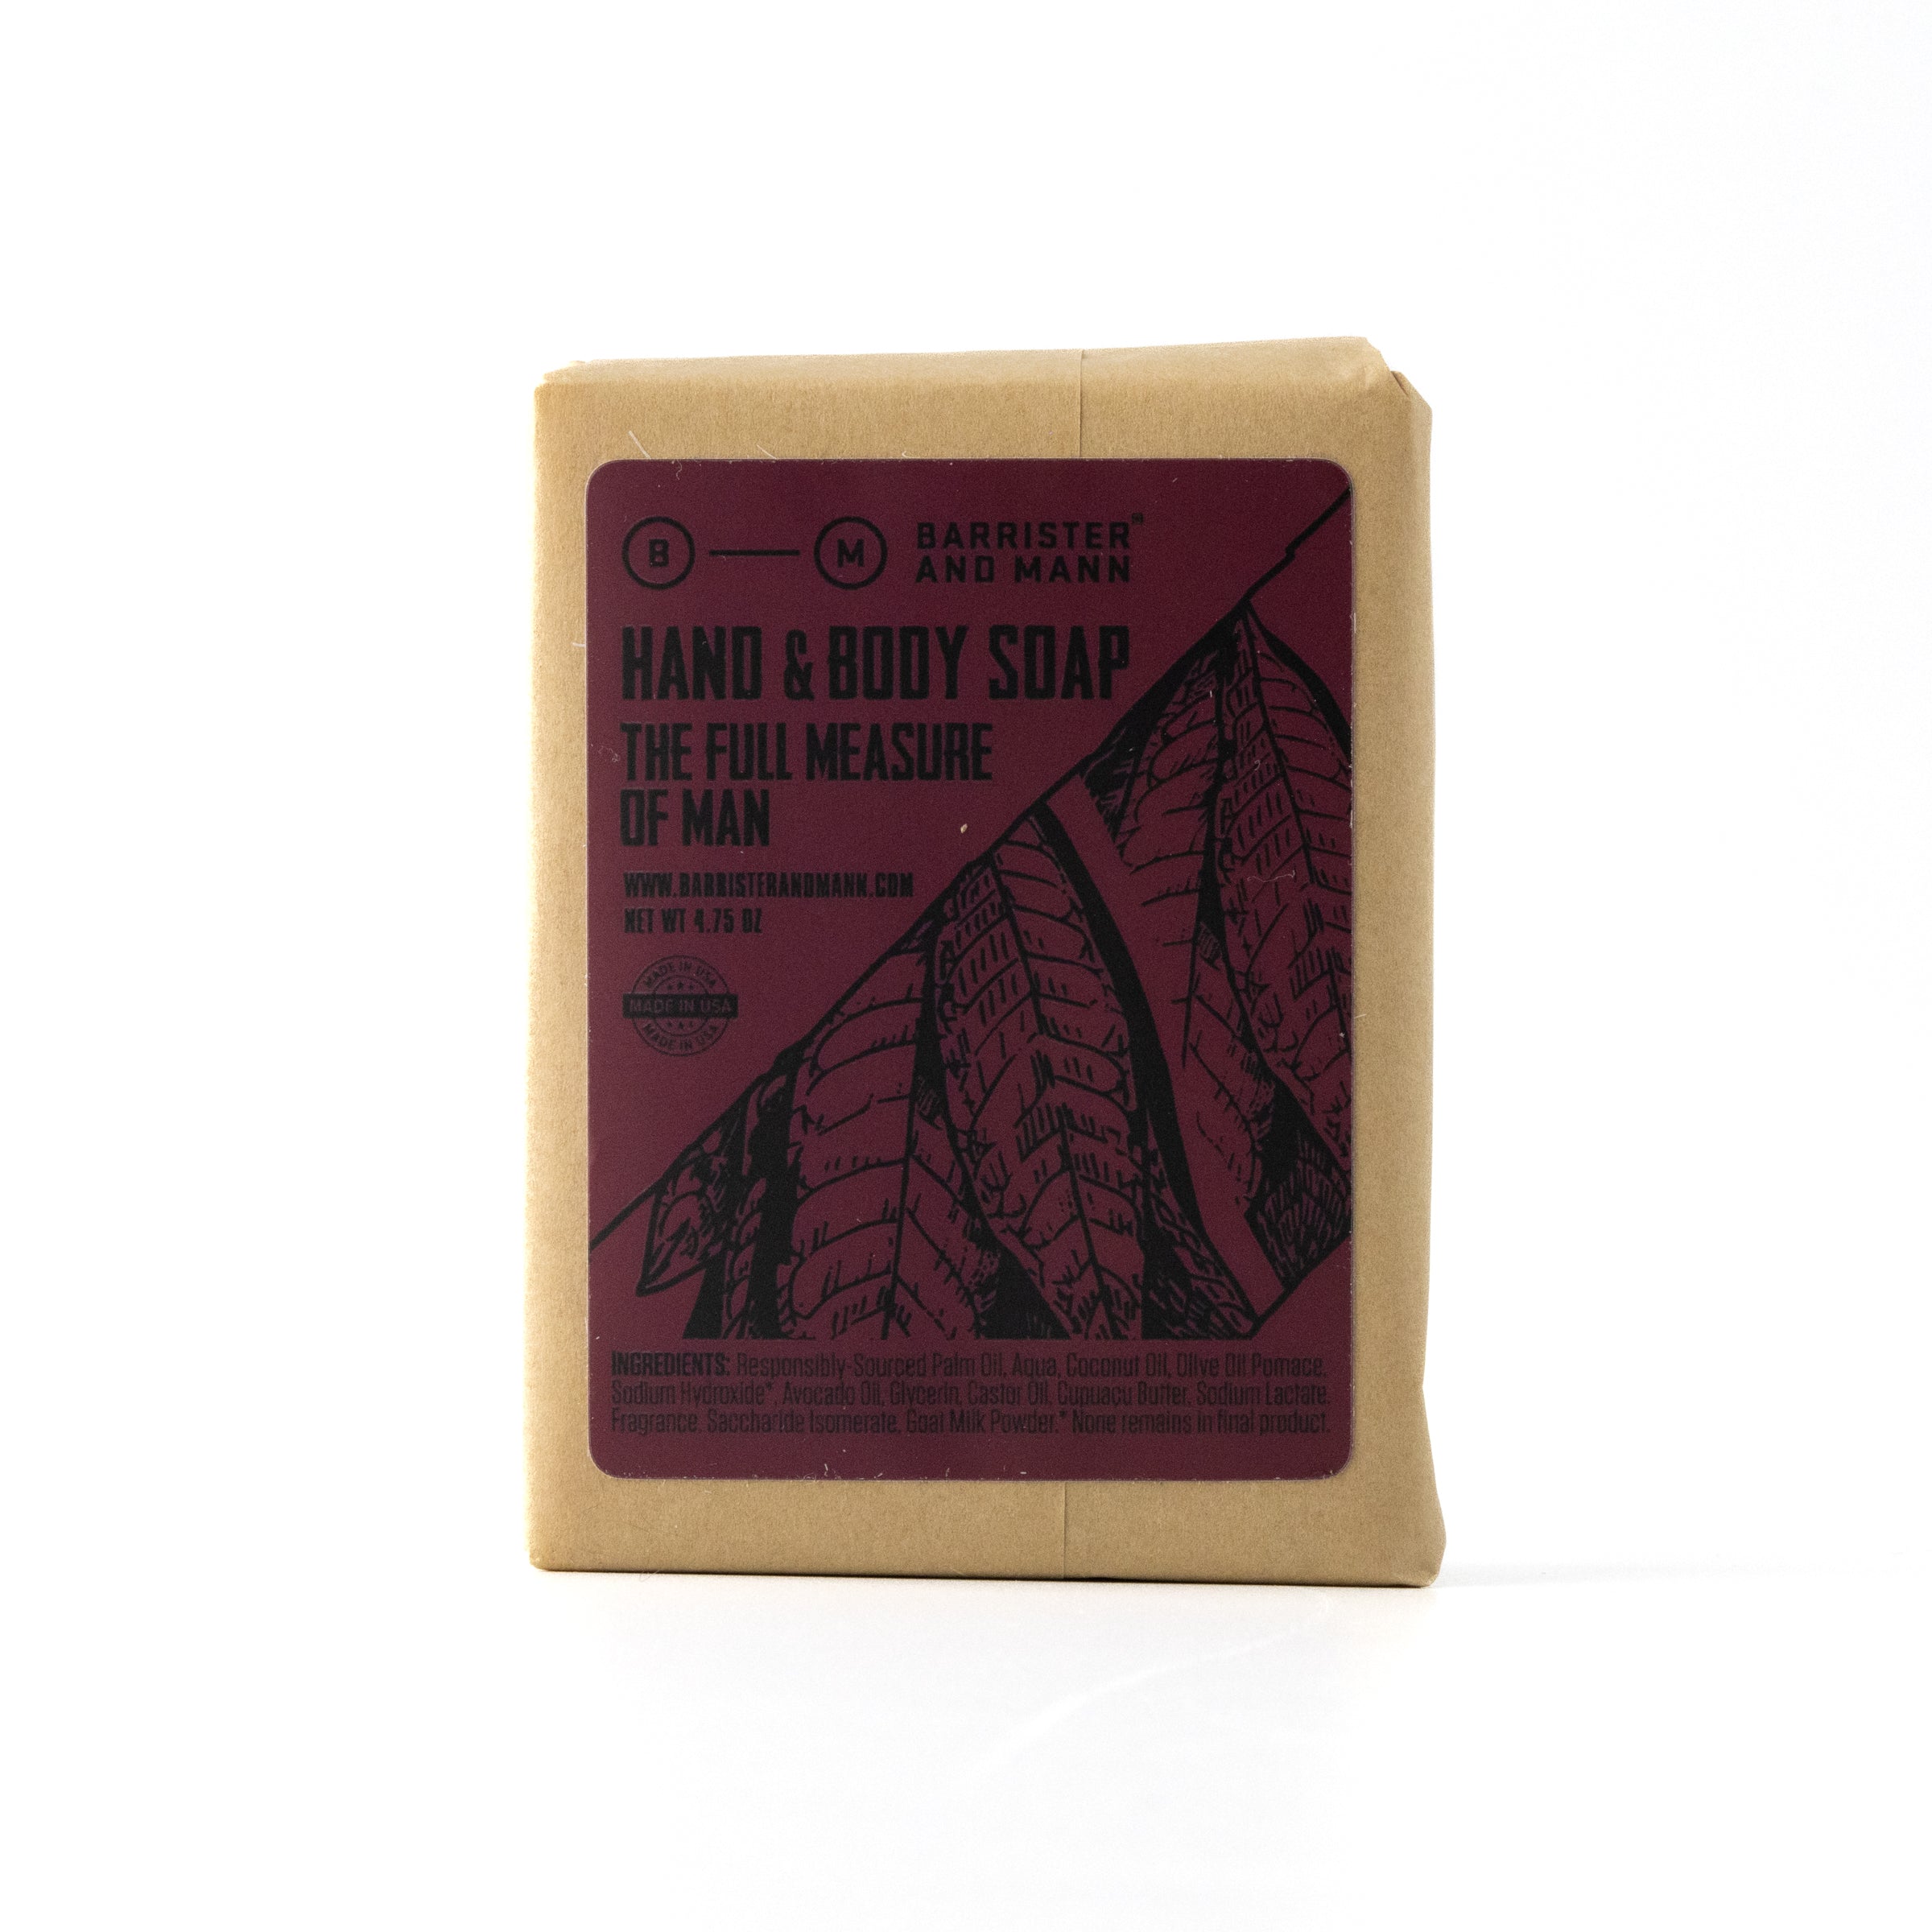 Hand &amp; Body Soap: The Full Measure of Man - Barrister and Mann LLC